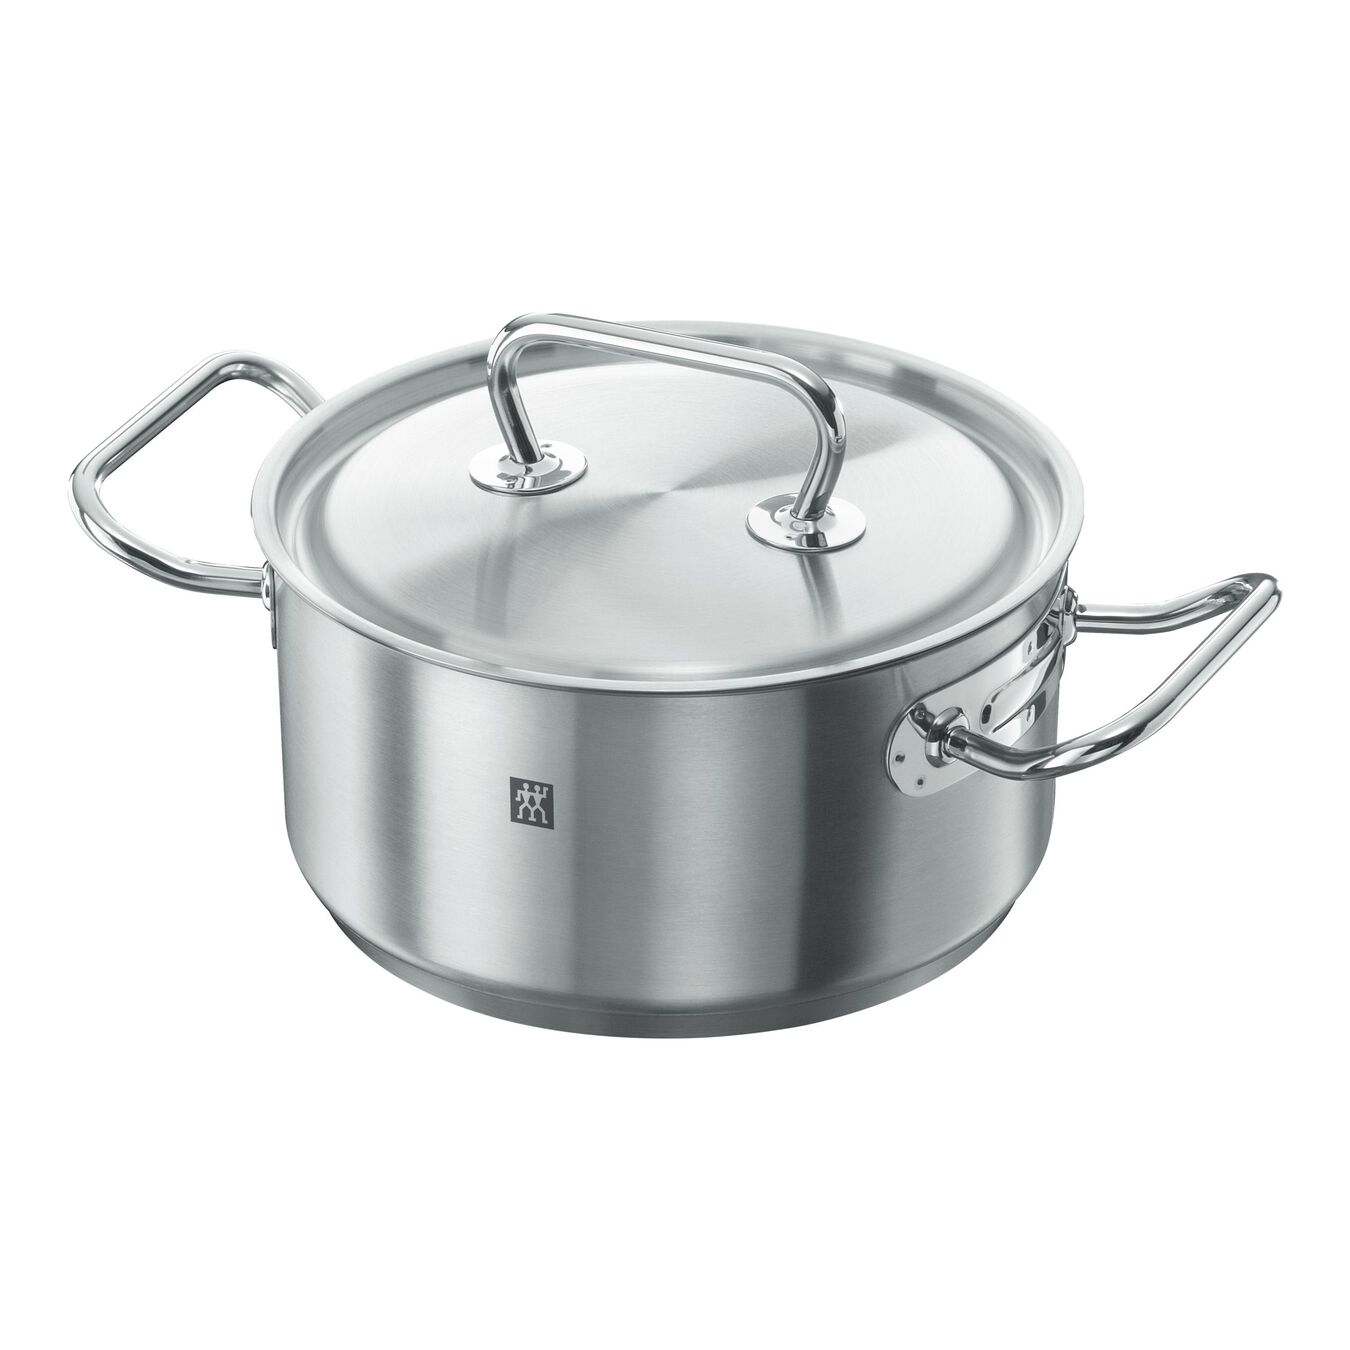 20 cm 18/10 Stainless Steel Stew pot,,large 1